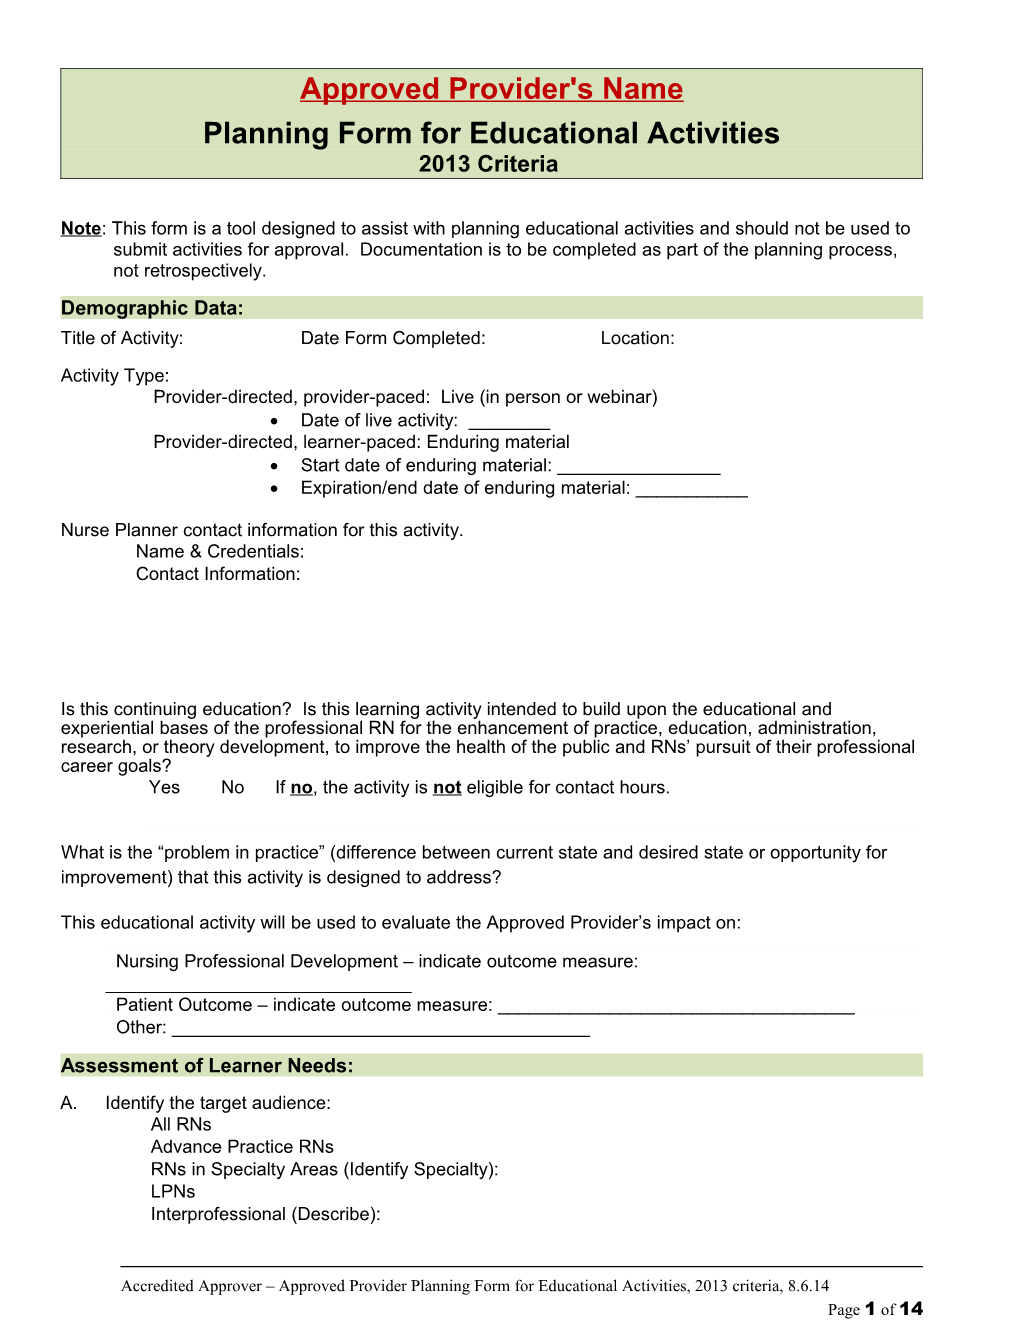 Planning Form for Educational Activities